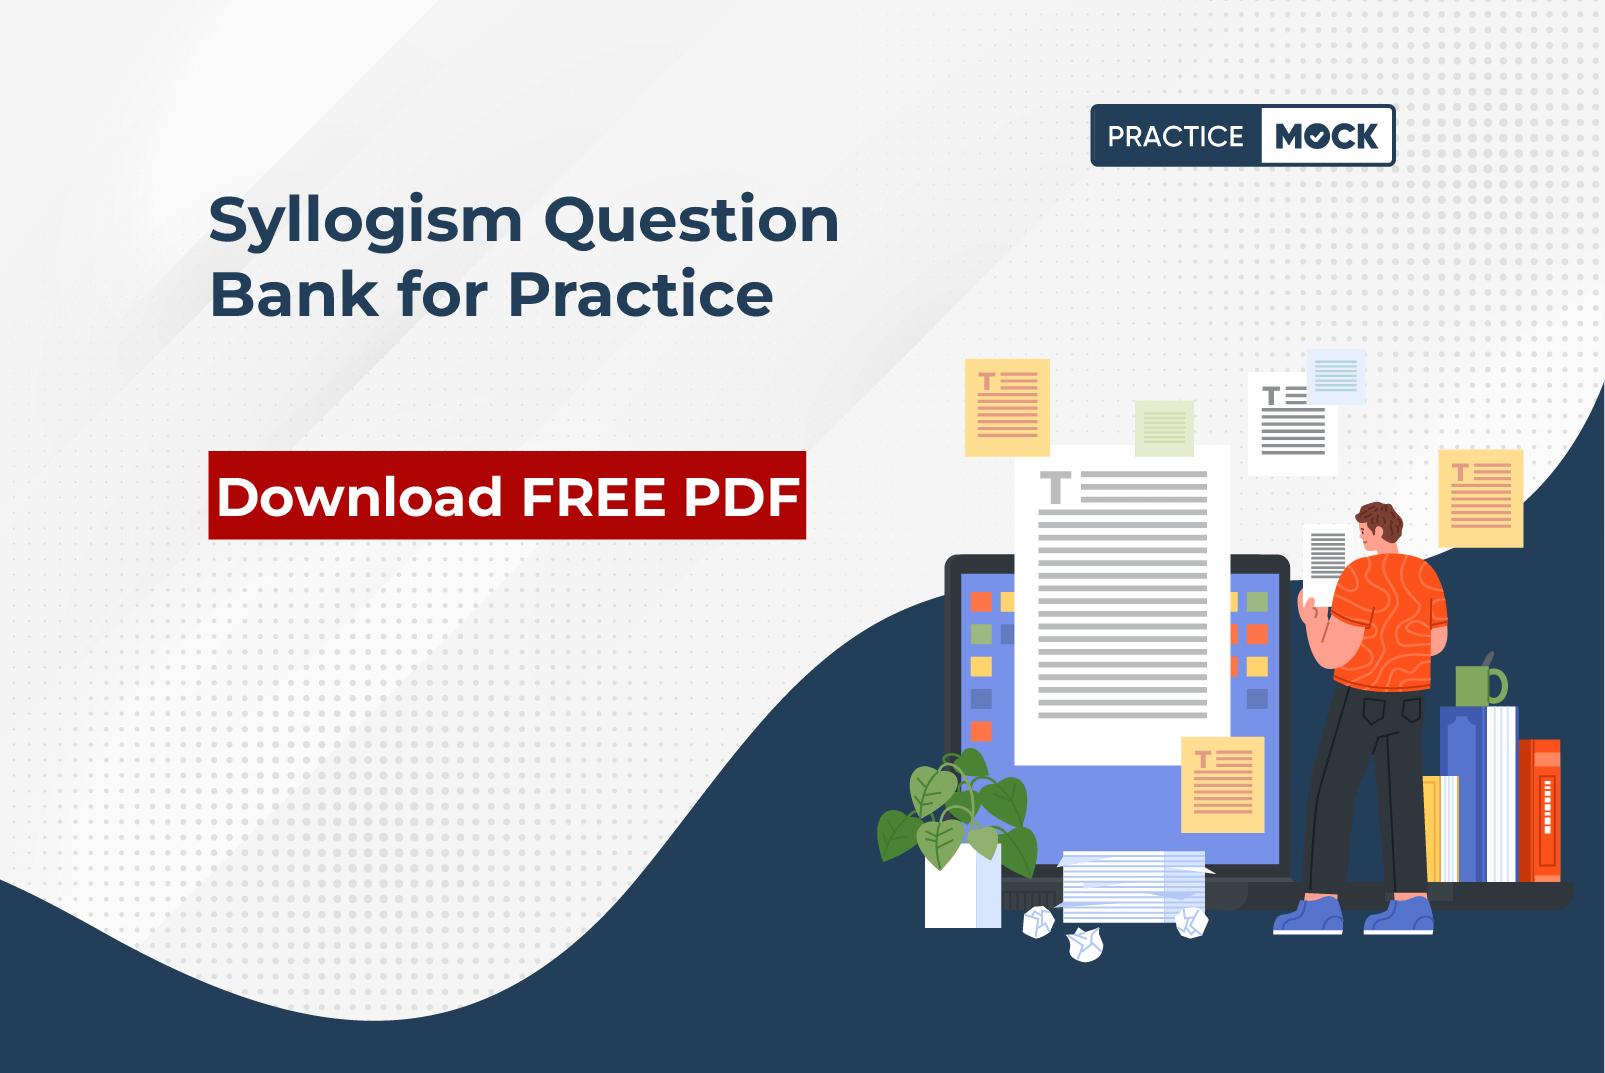 Syllogism Question Bank for Practice Download FREE PDF